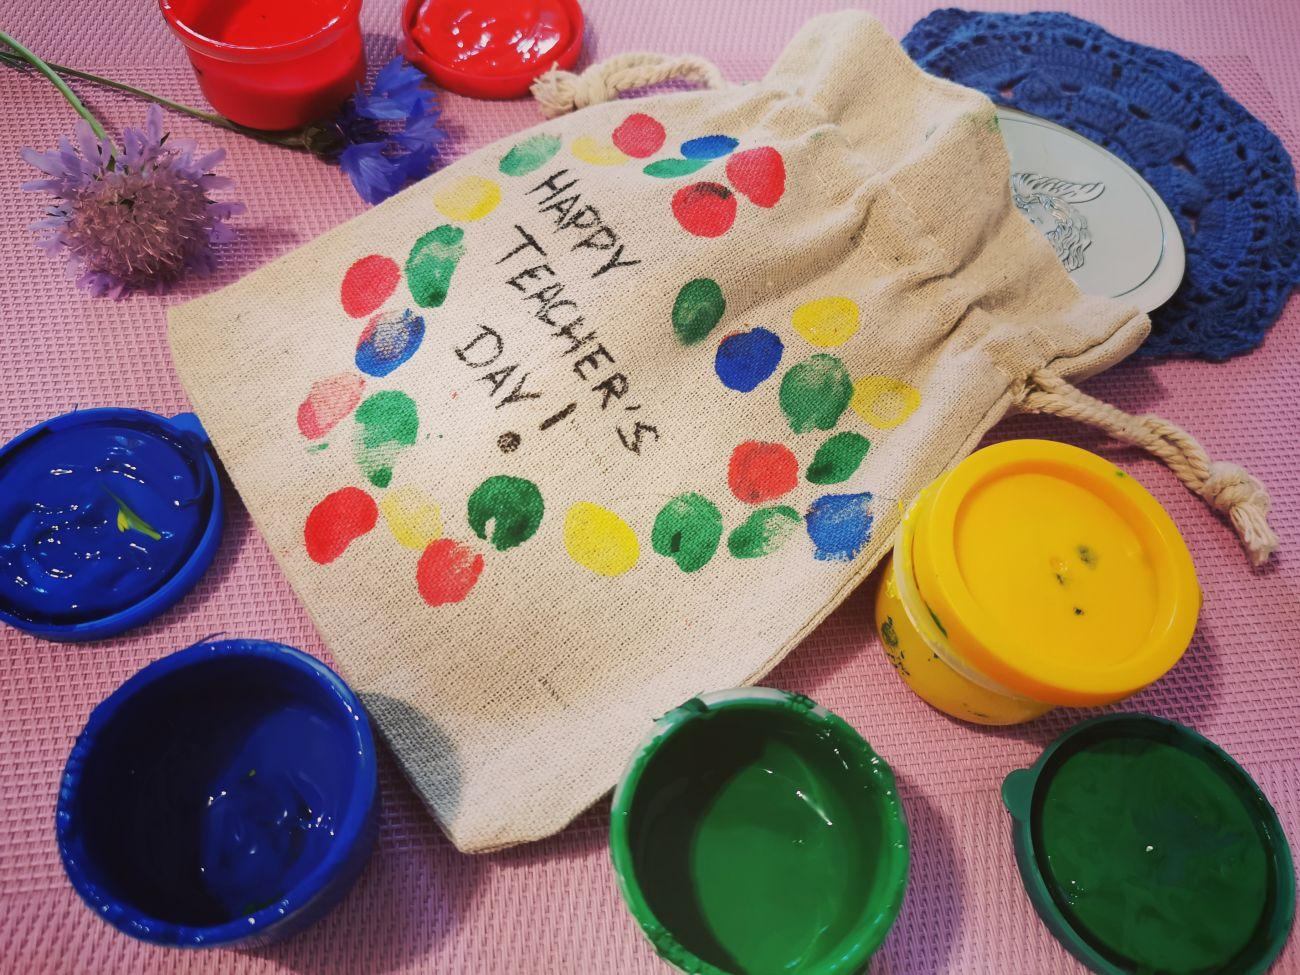 A gift for a teacher in a bag decorated with his students' fingerprints